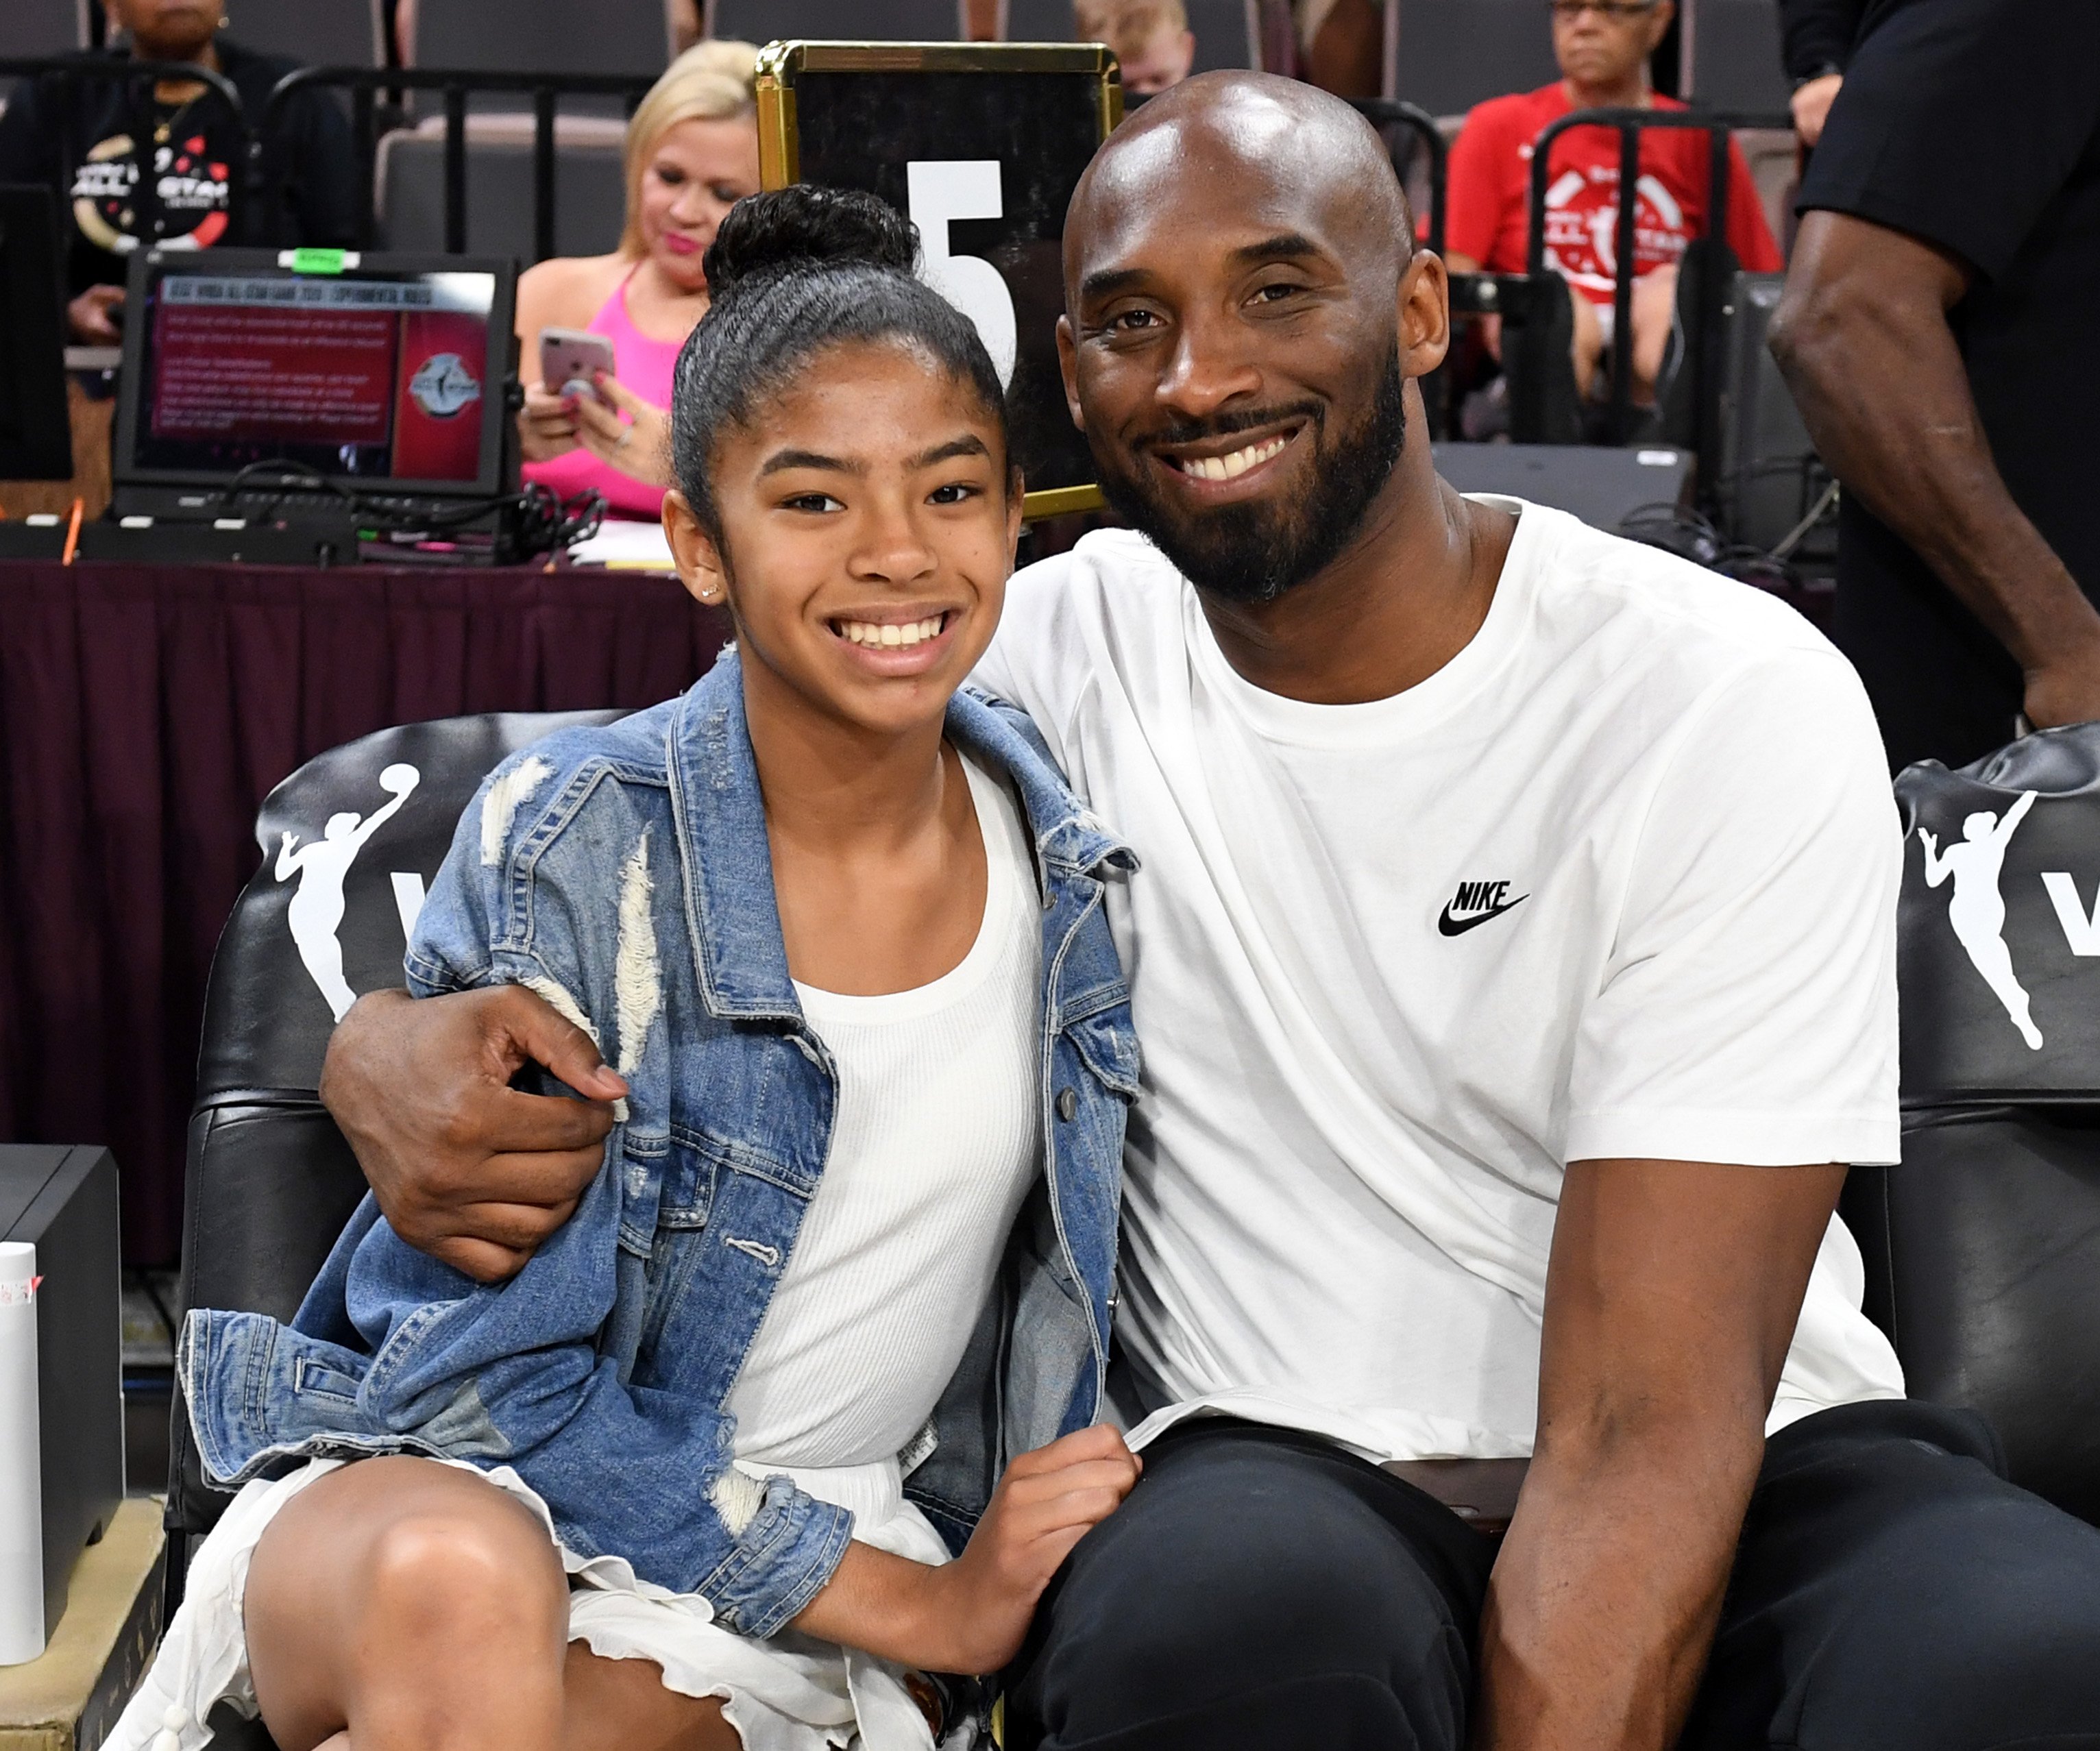 Kobe and Gianna Bryant at the WNBA All-Star Game 2019 at the Mandalay Bay Events Center in Las Vegas, Nevada | Photo: Ethan Miller/Getty Images